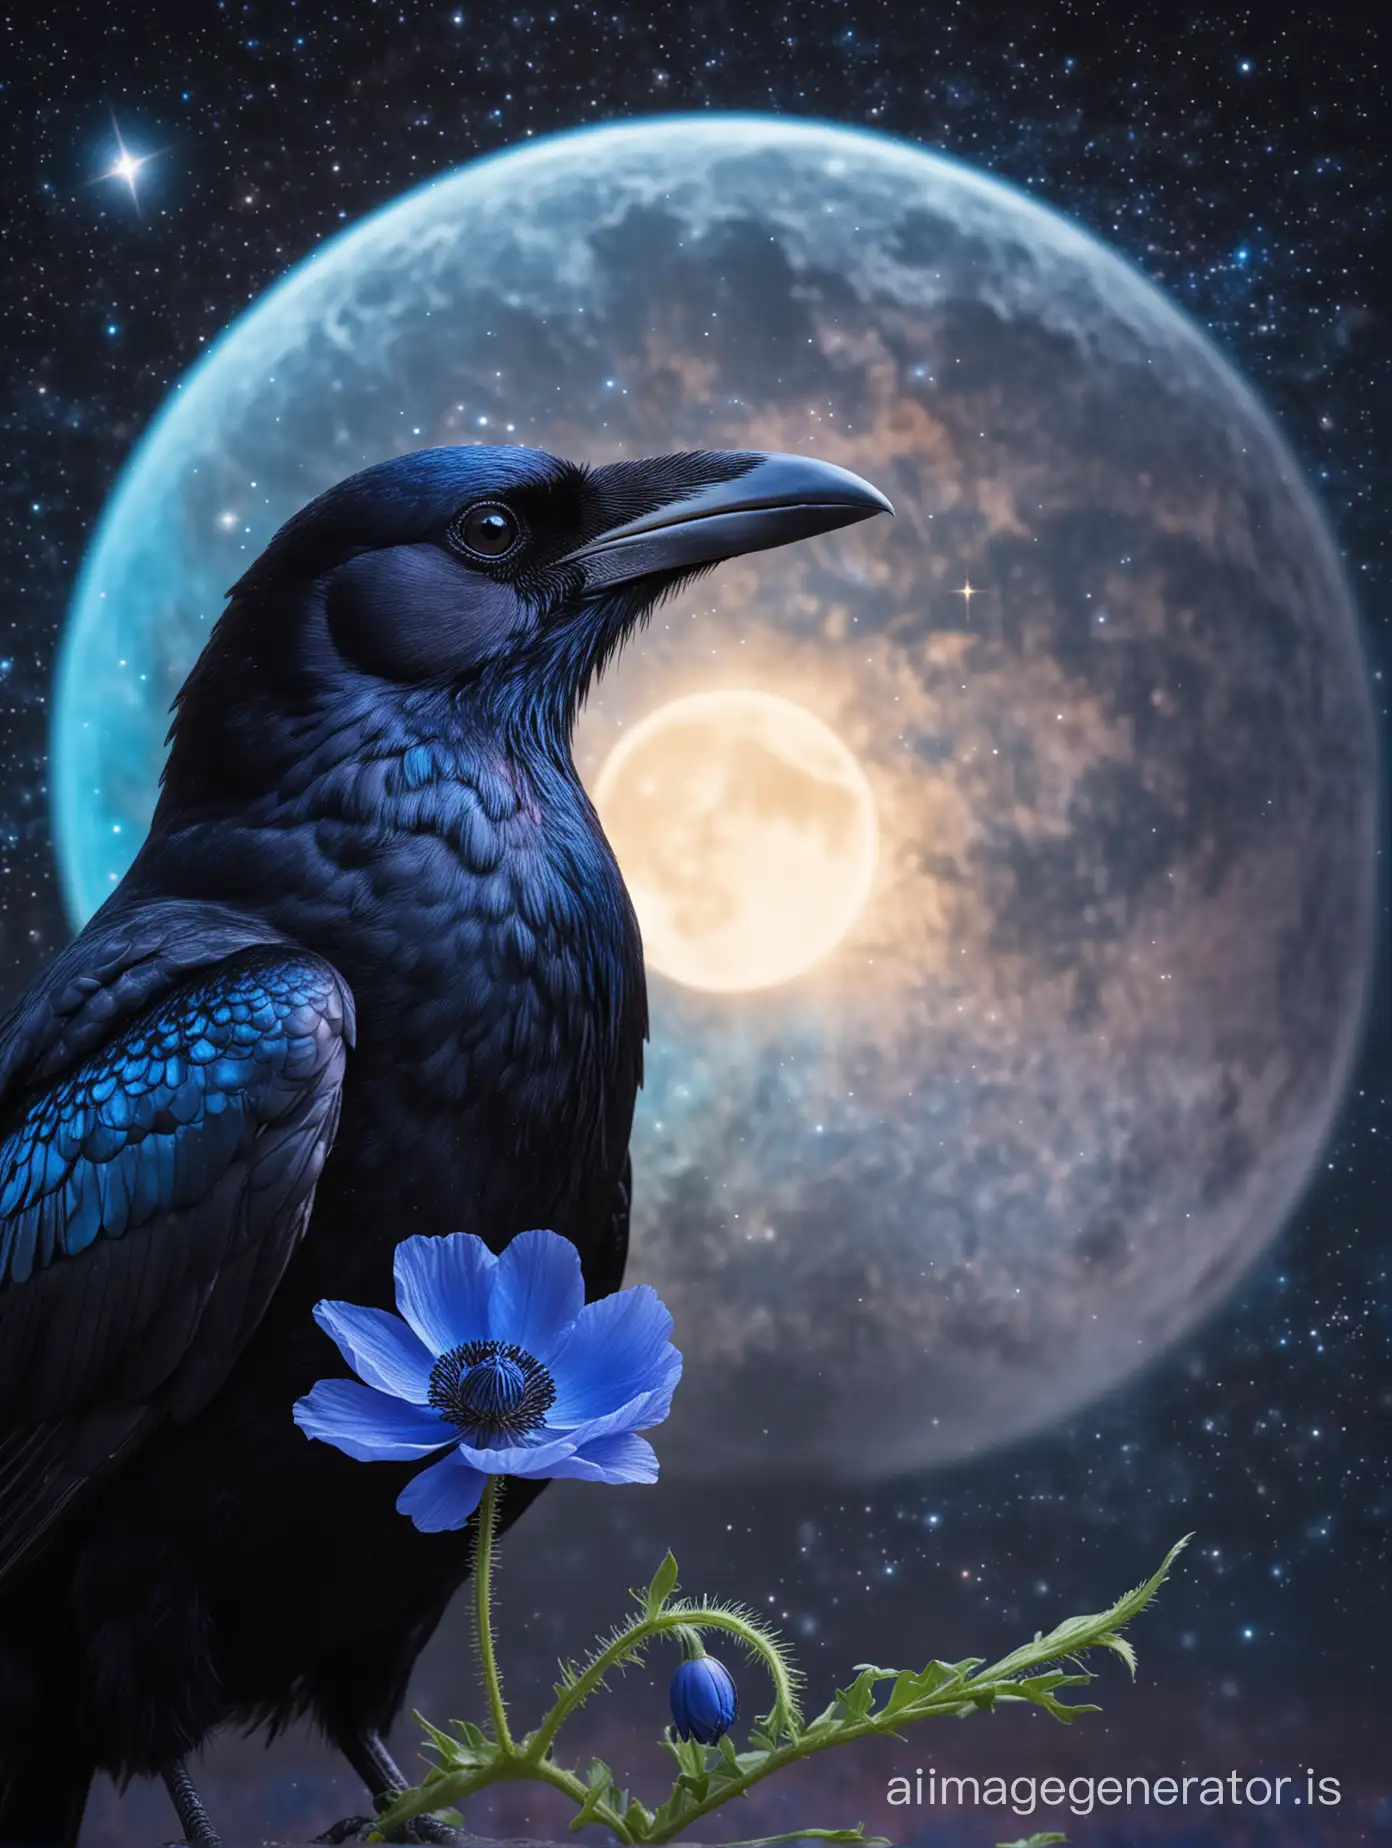 The beautiful iridescent black crow holds a blue poppy flower in its beak against the backdrop of a starry, cosmic sky, glowing, glimmering, moon, neon